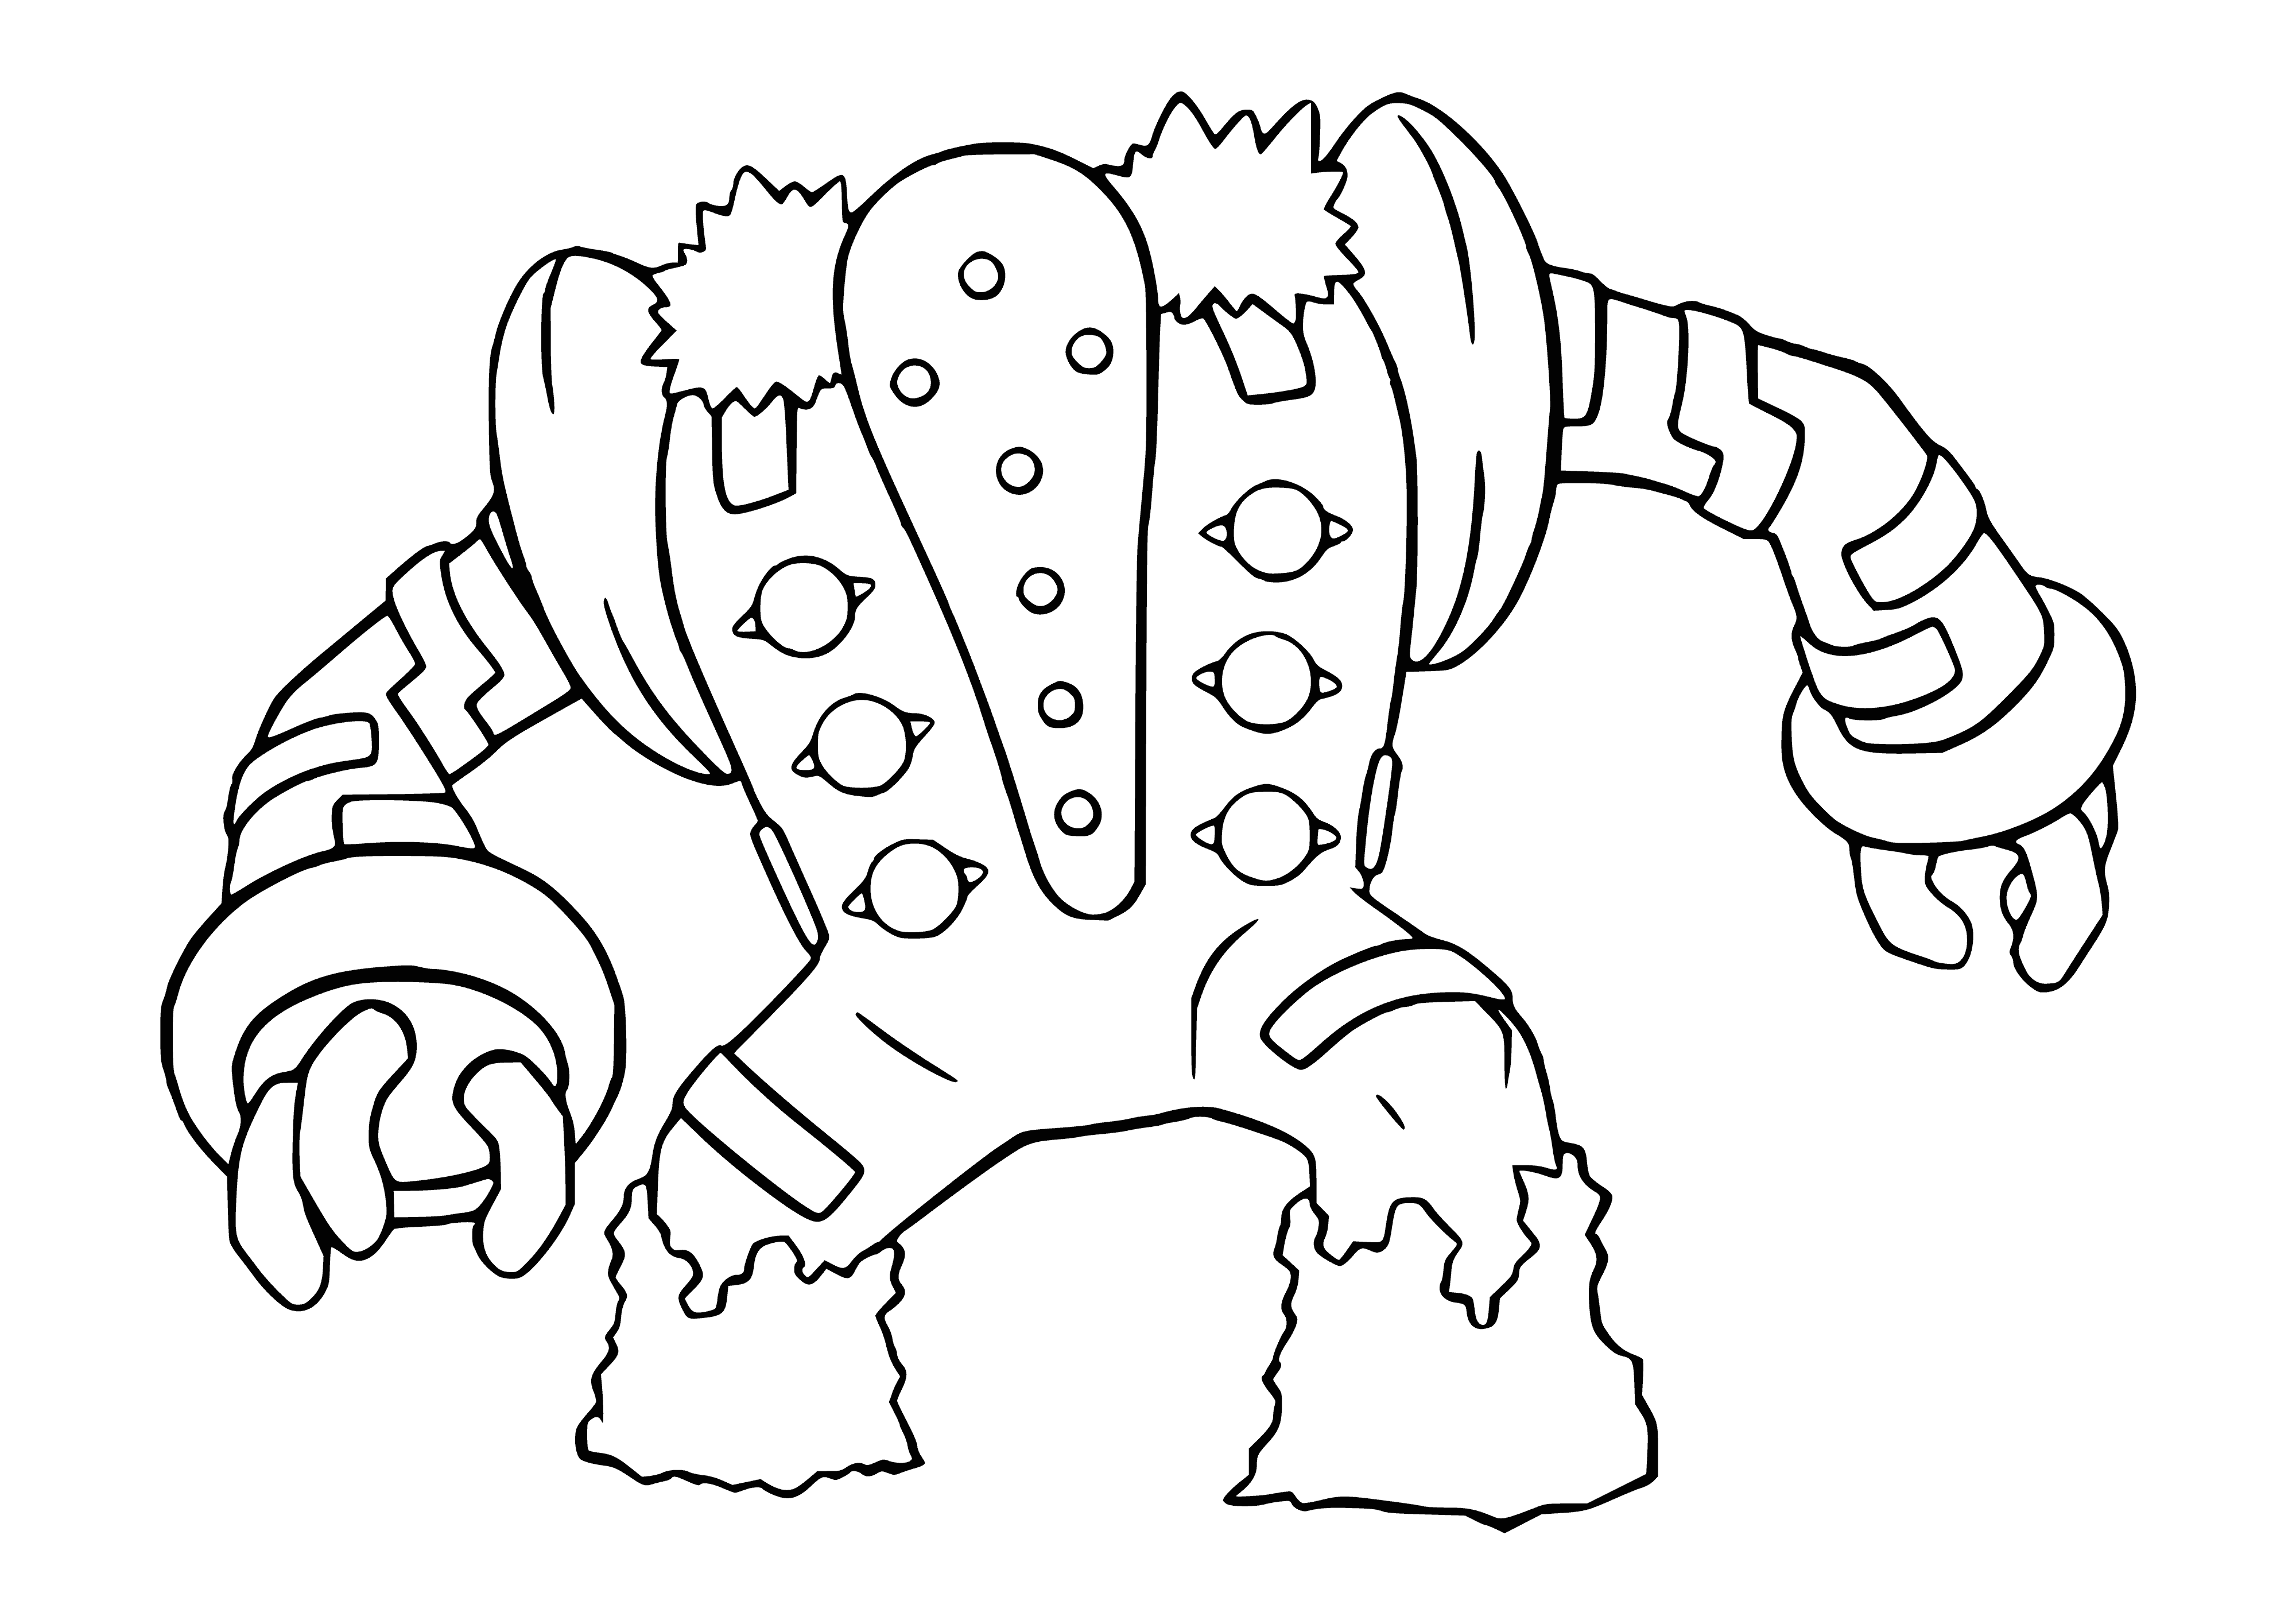 coloring page: Giant, skeletal Pokémon w/ red eyes, three stripes & two sets of arms. Has large, round body & thick arms & legs, stubby tail & orange lower body.